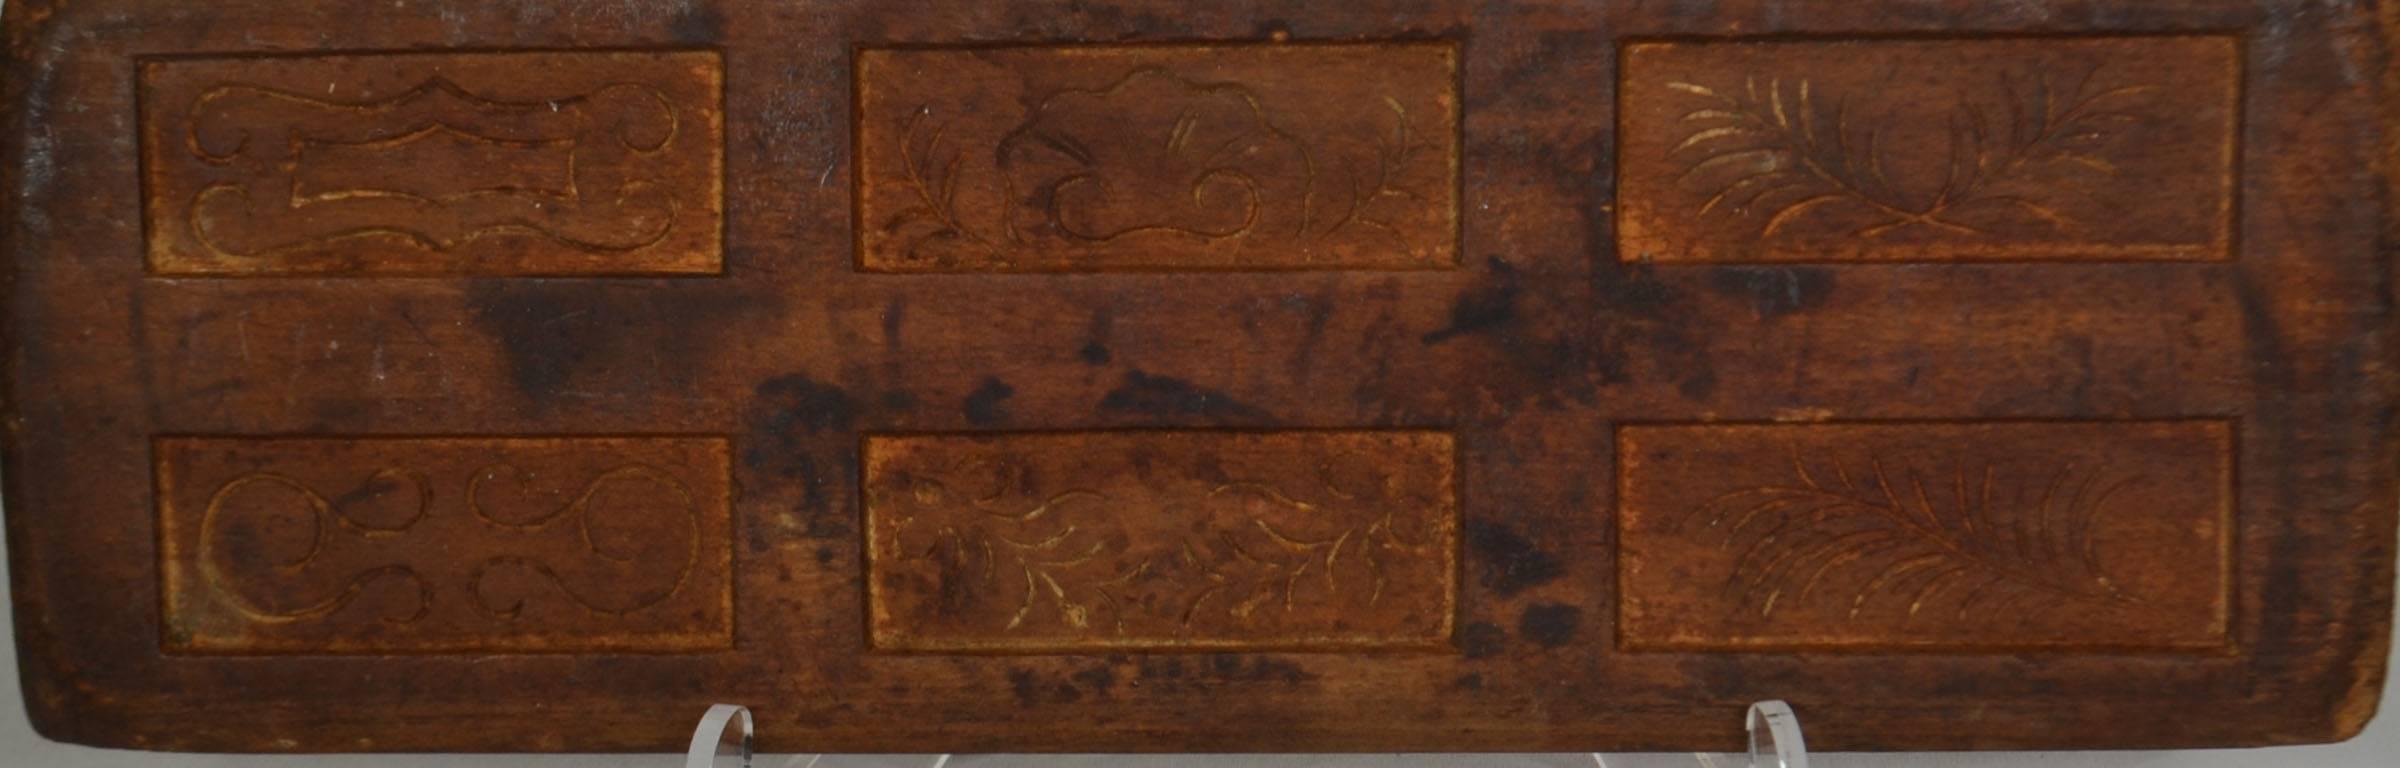 Wooden gingerbread mold (rectangle shapes with simple designs).